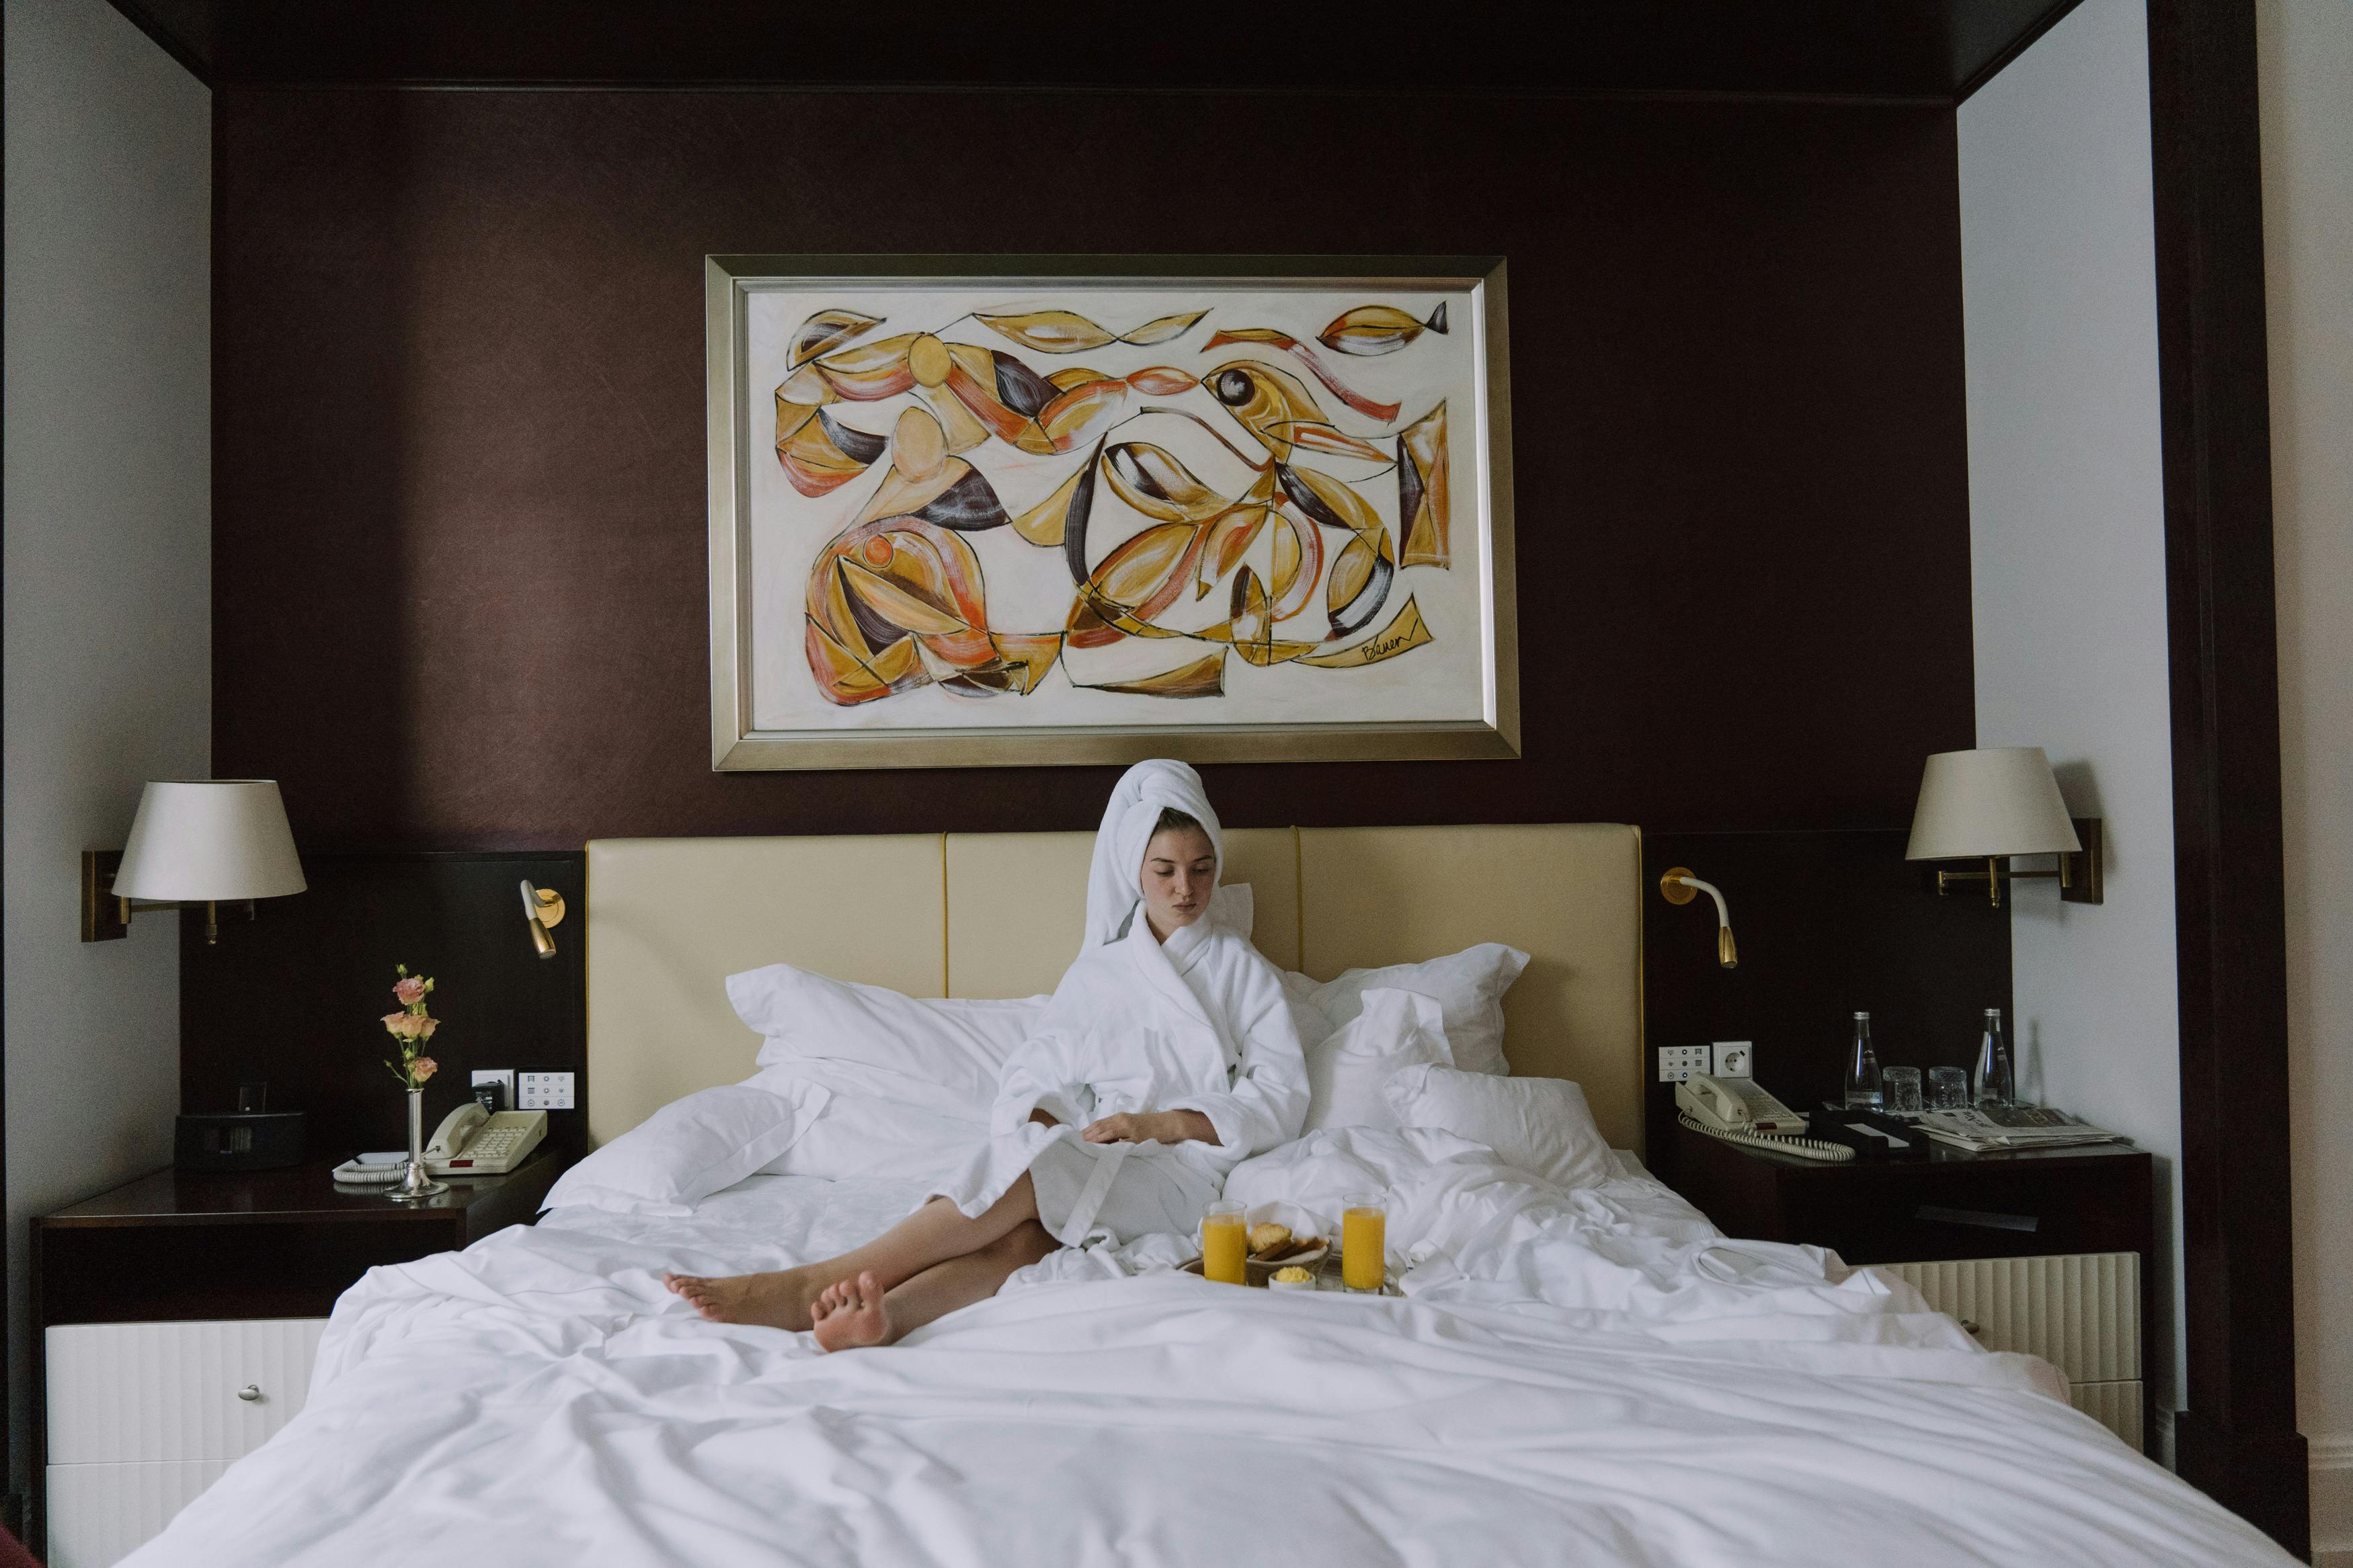 An upset woman sitting on a hotel room bed in a bathrobe | Source: Pexels